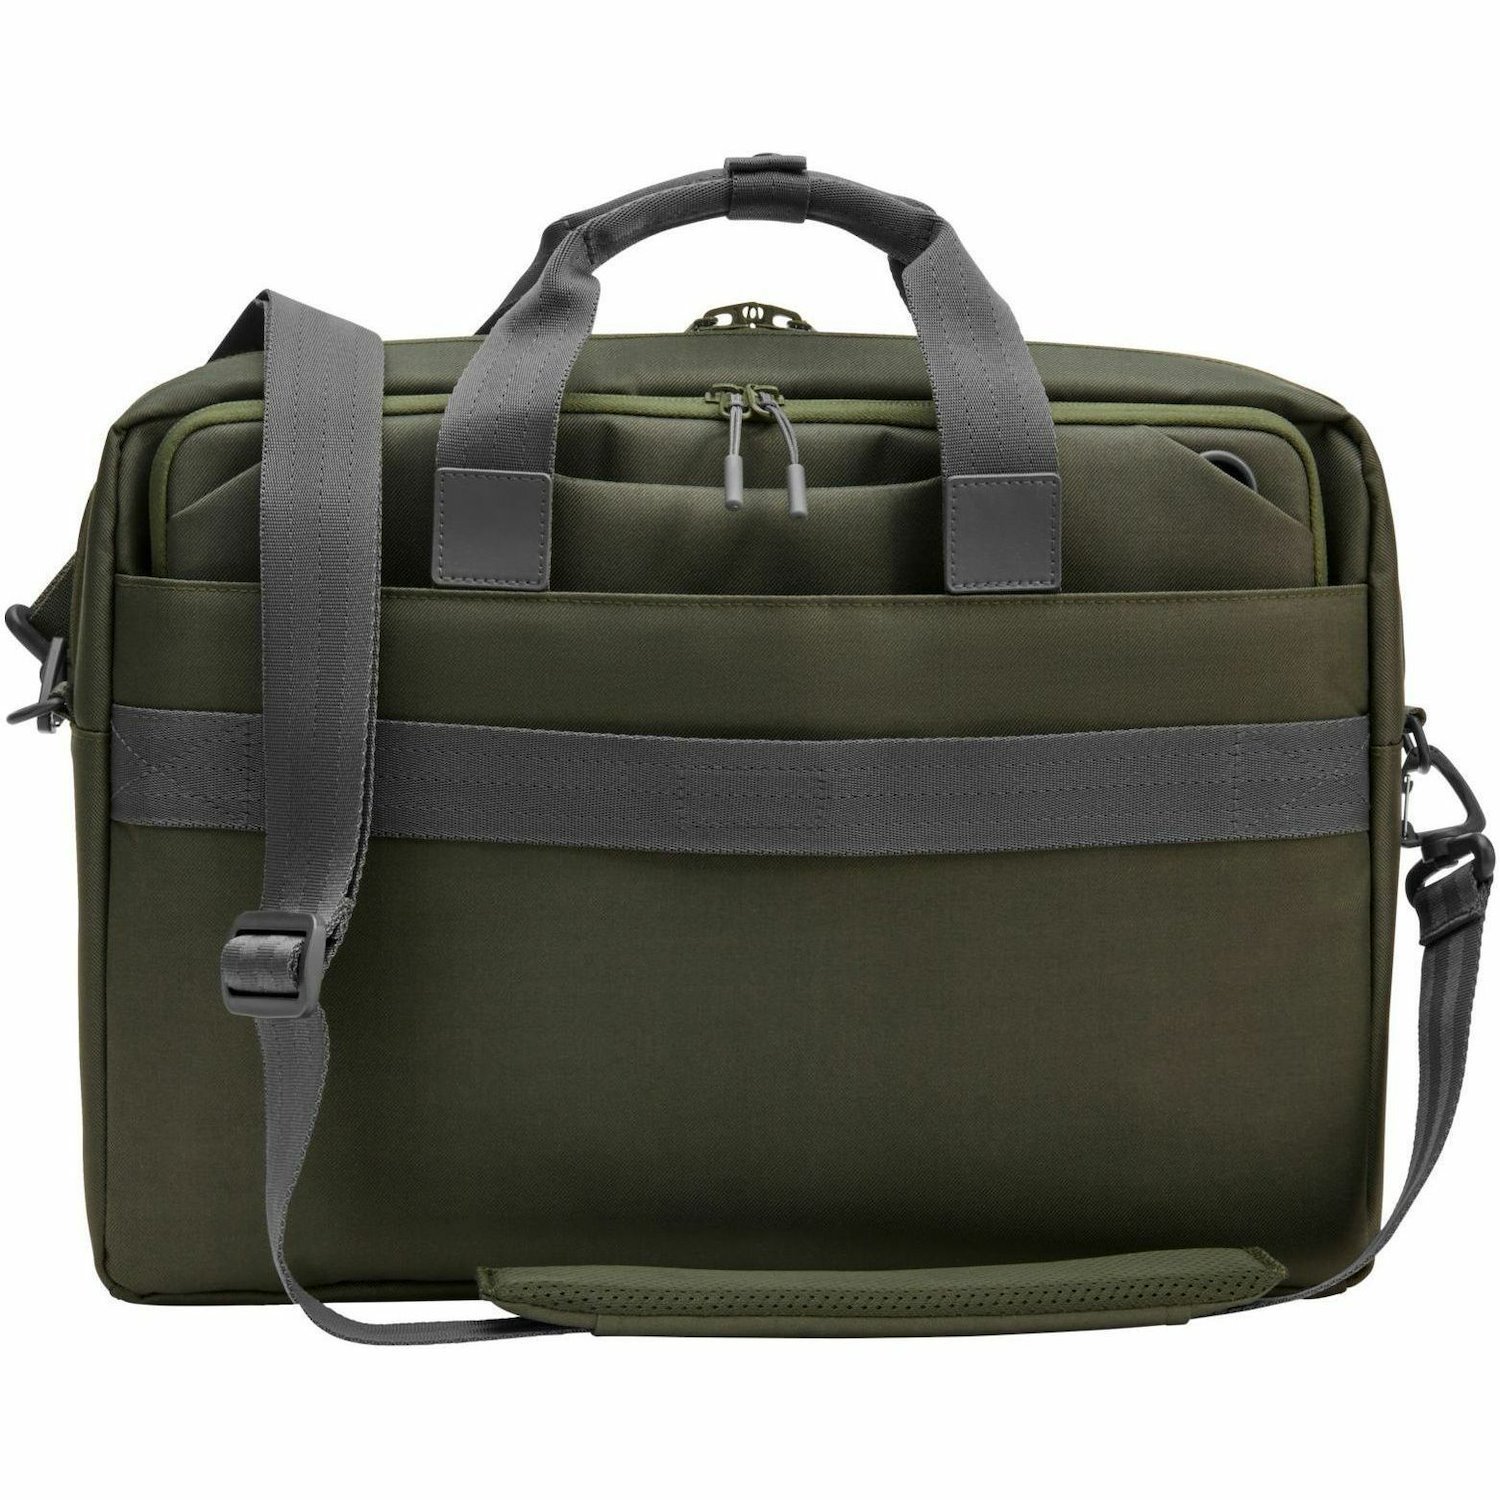 HP Carrying Case (Messenger) for 15.6" Notebook - Gray, Green